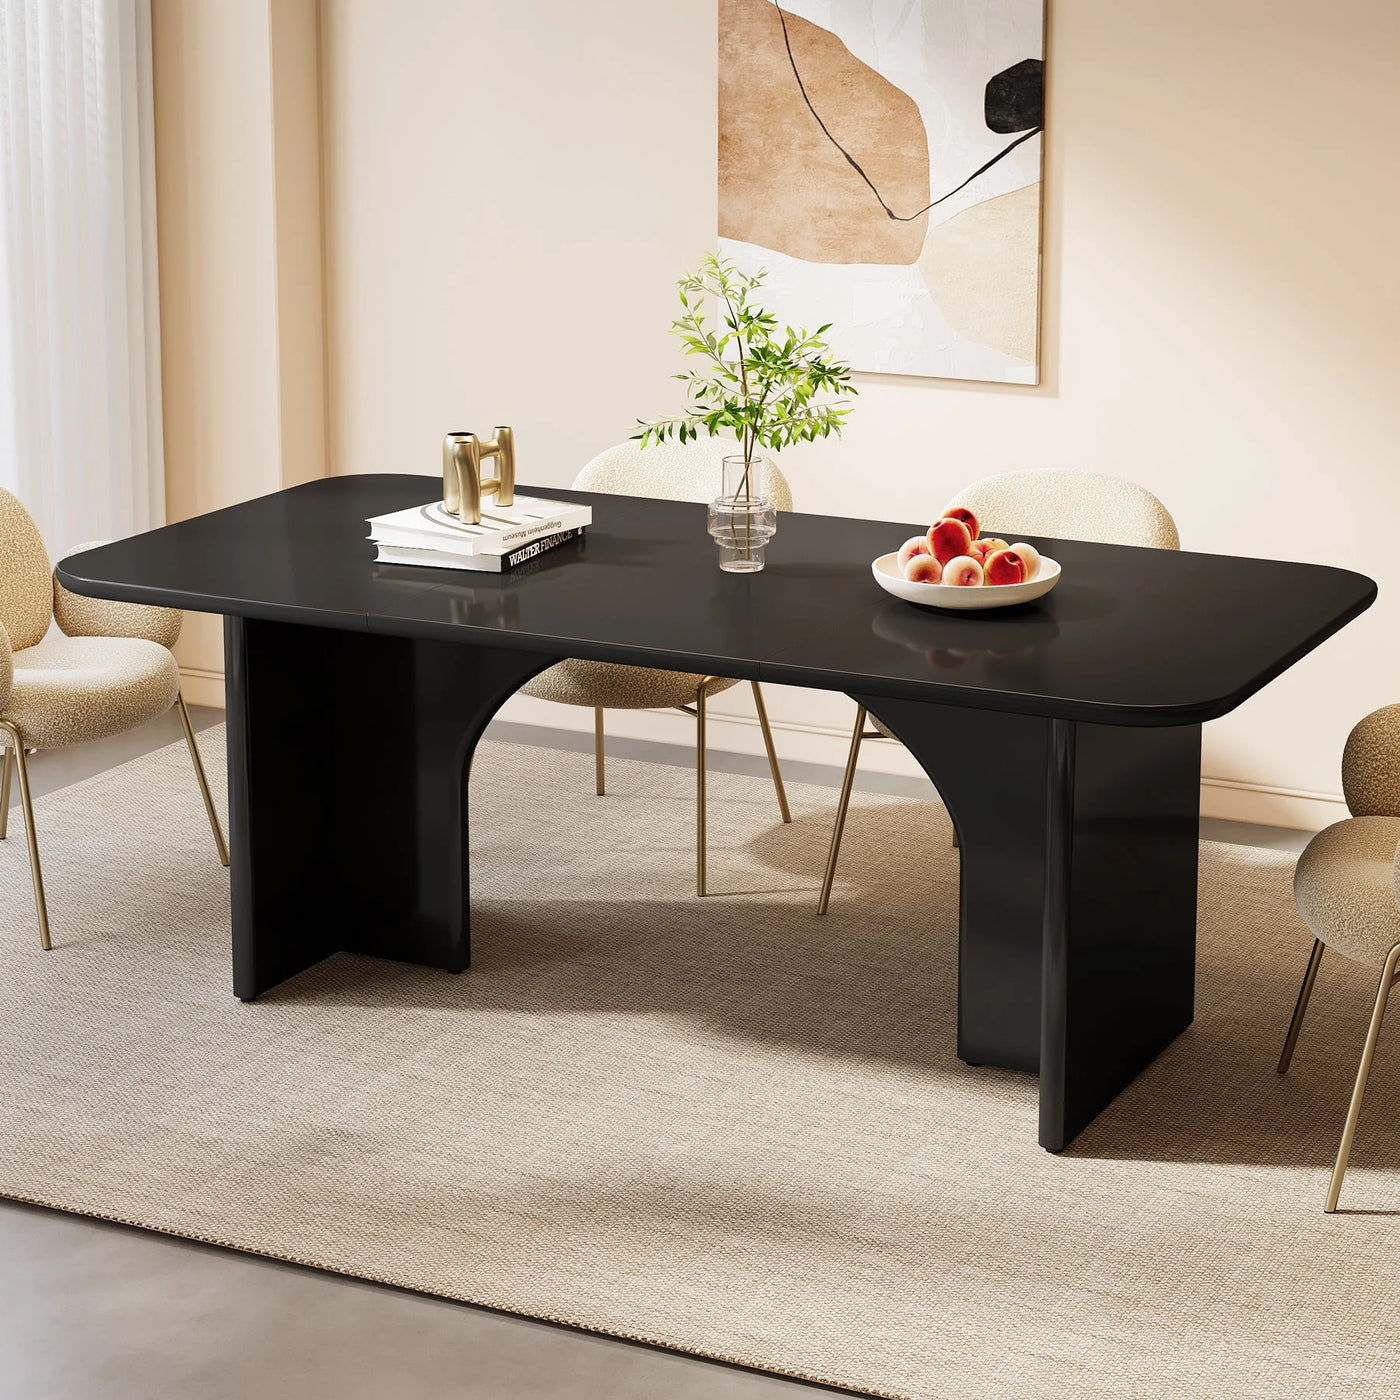 Trest Modern Dining Table | Black Wood Large Rectangle Kitchen Table for 4-6 People